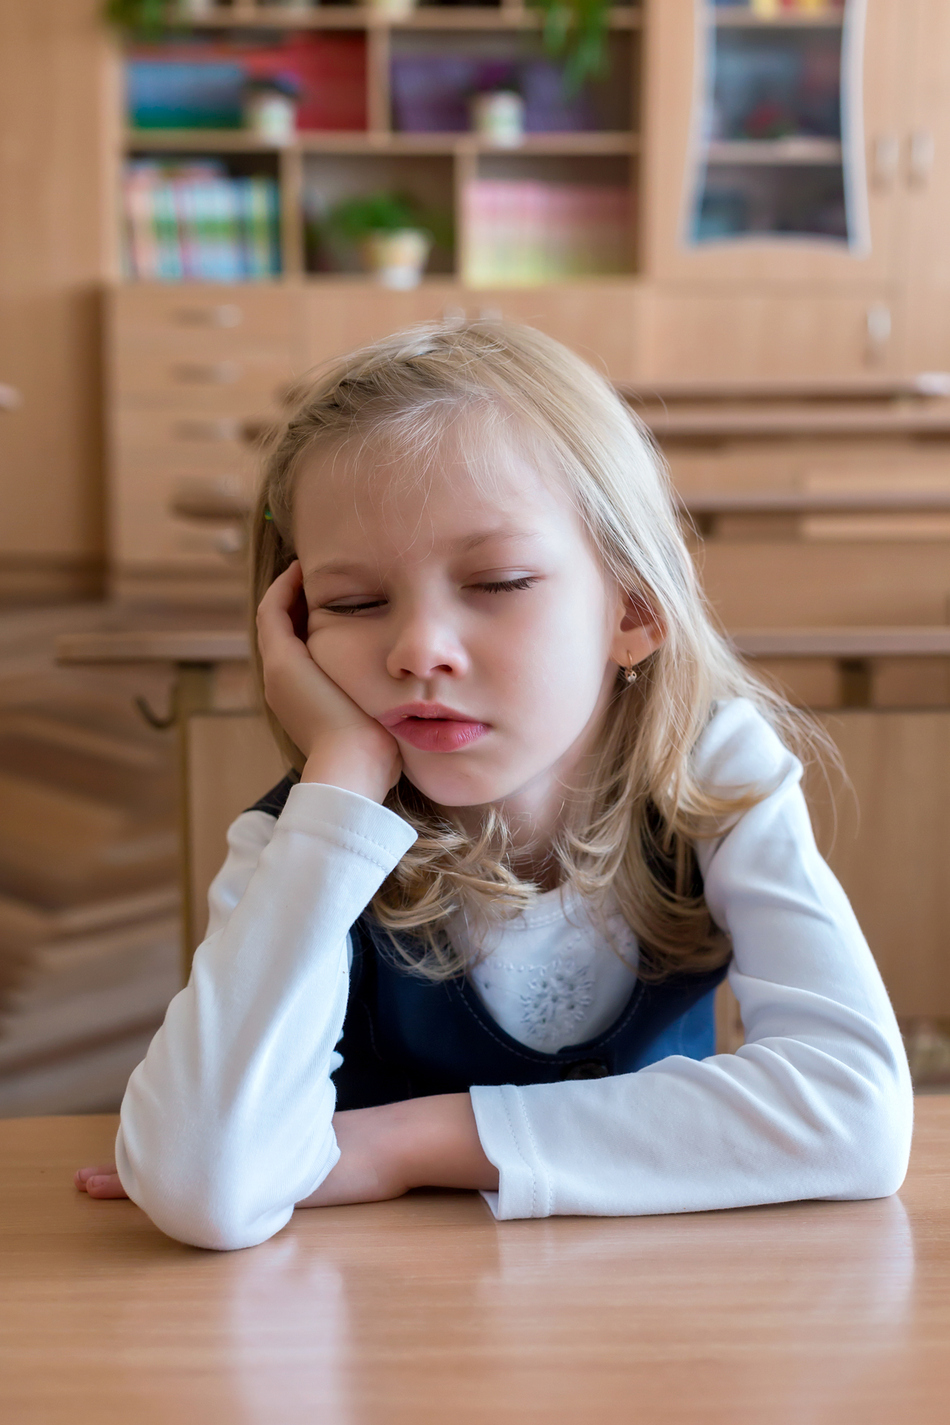 Lack of Sleep Can Affect Children's Performance in School